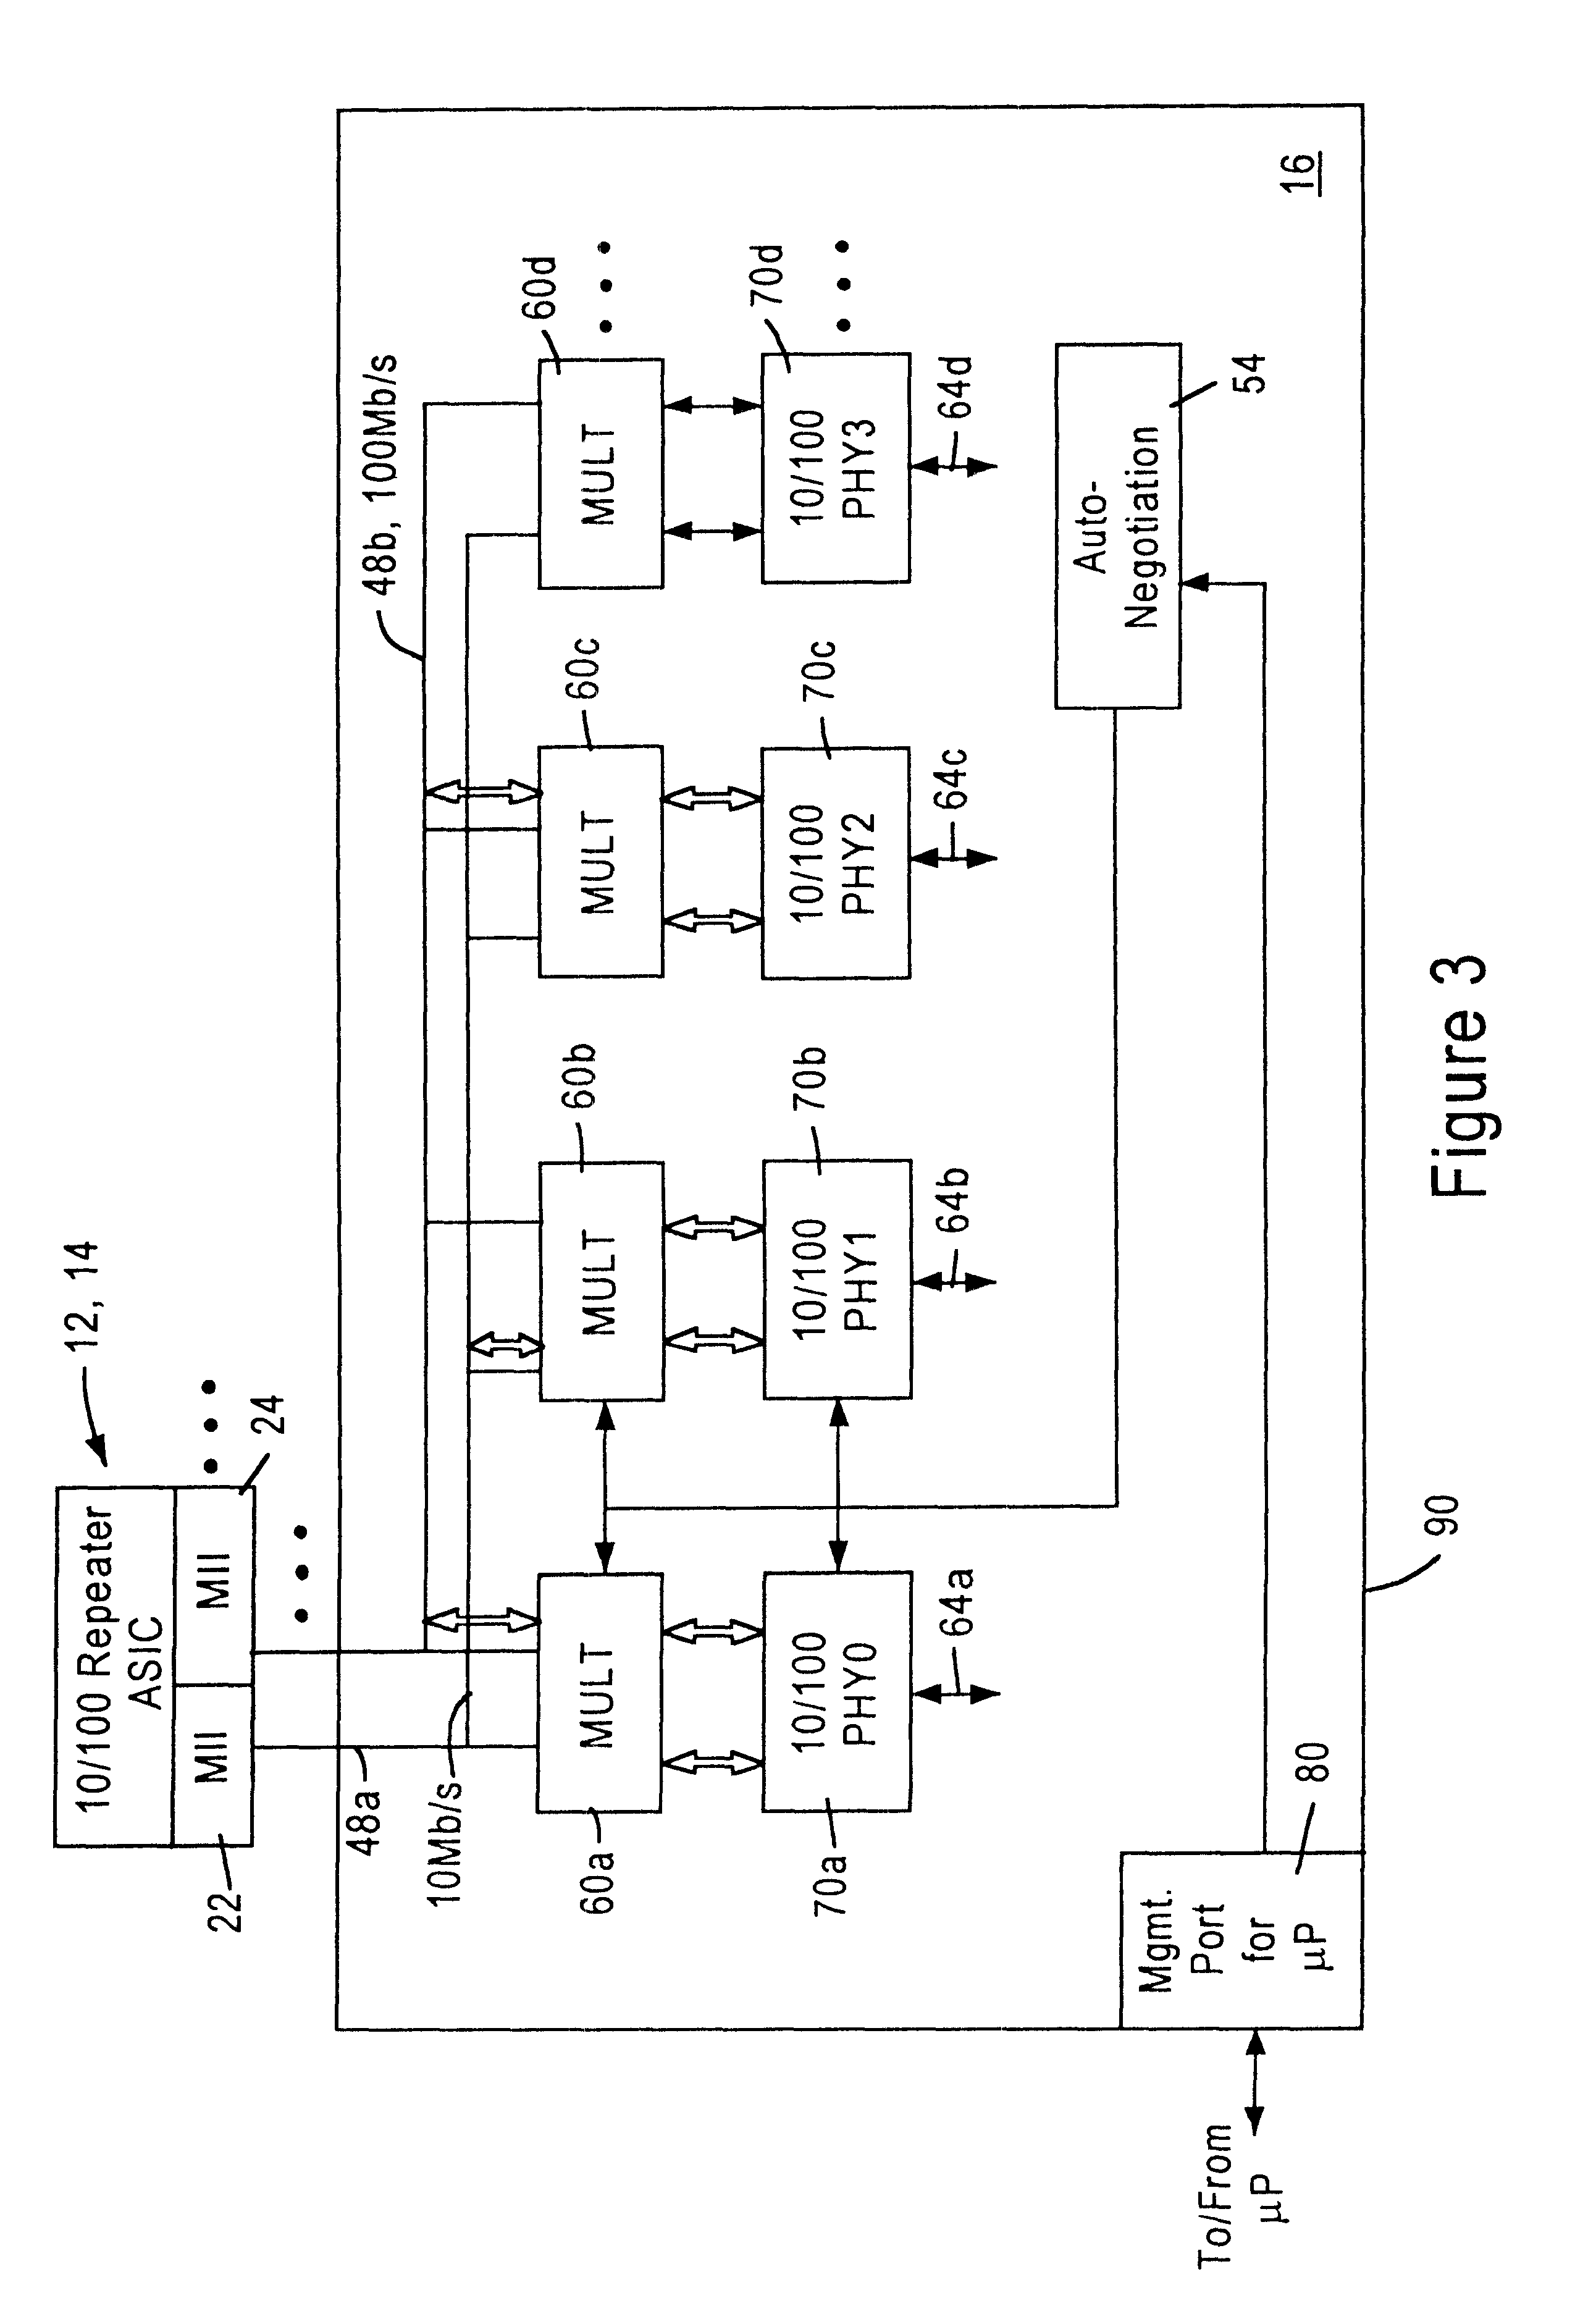 Network transceiver for steering network data to selected paths based on determined link speeds